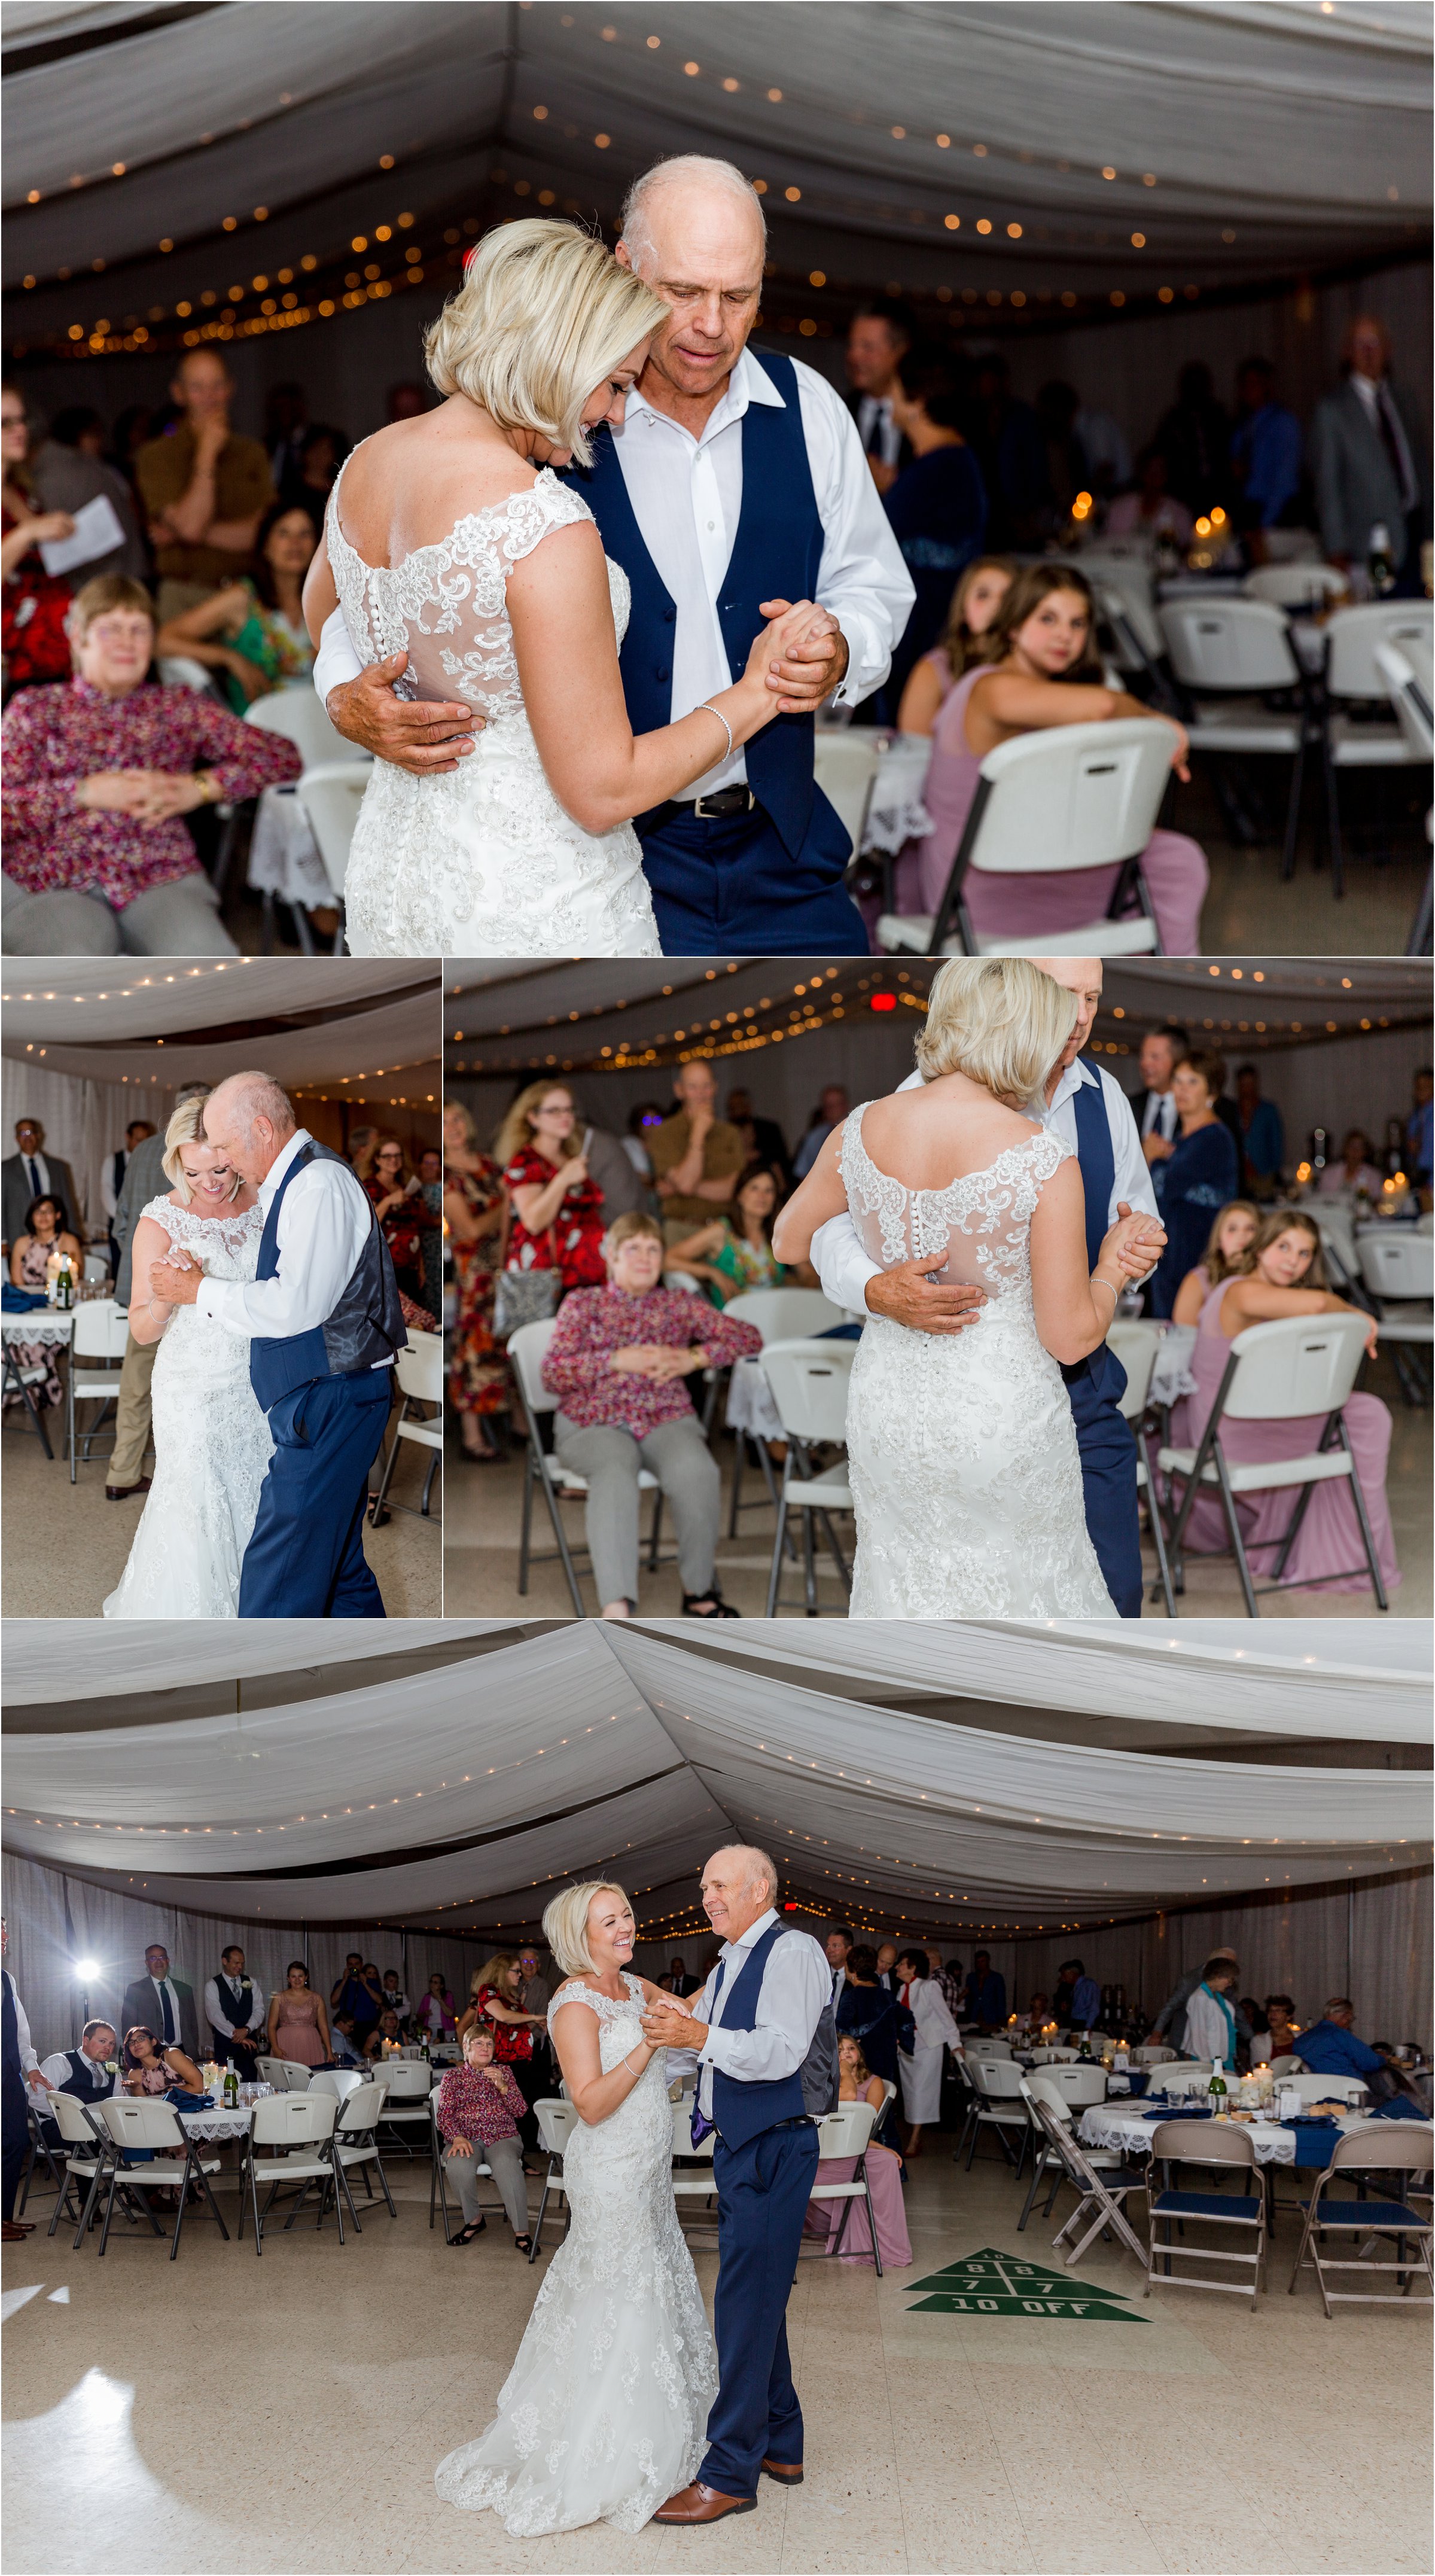 Bride and her dad dance together at her wedding reception in Cheyenne